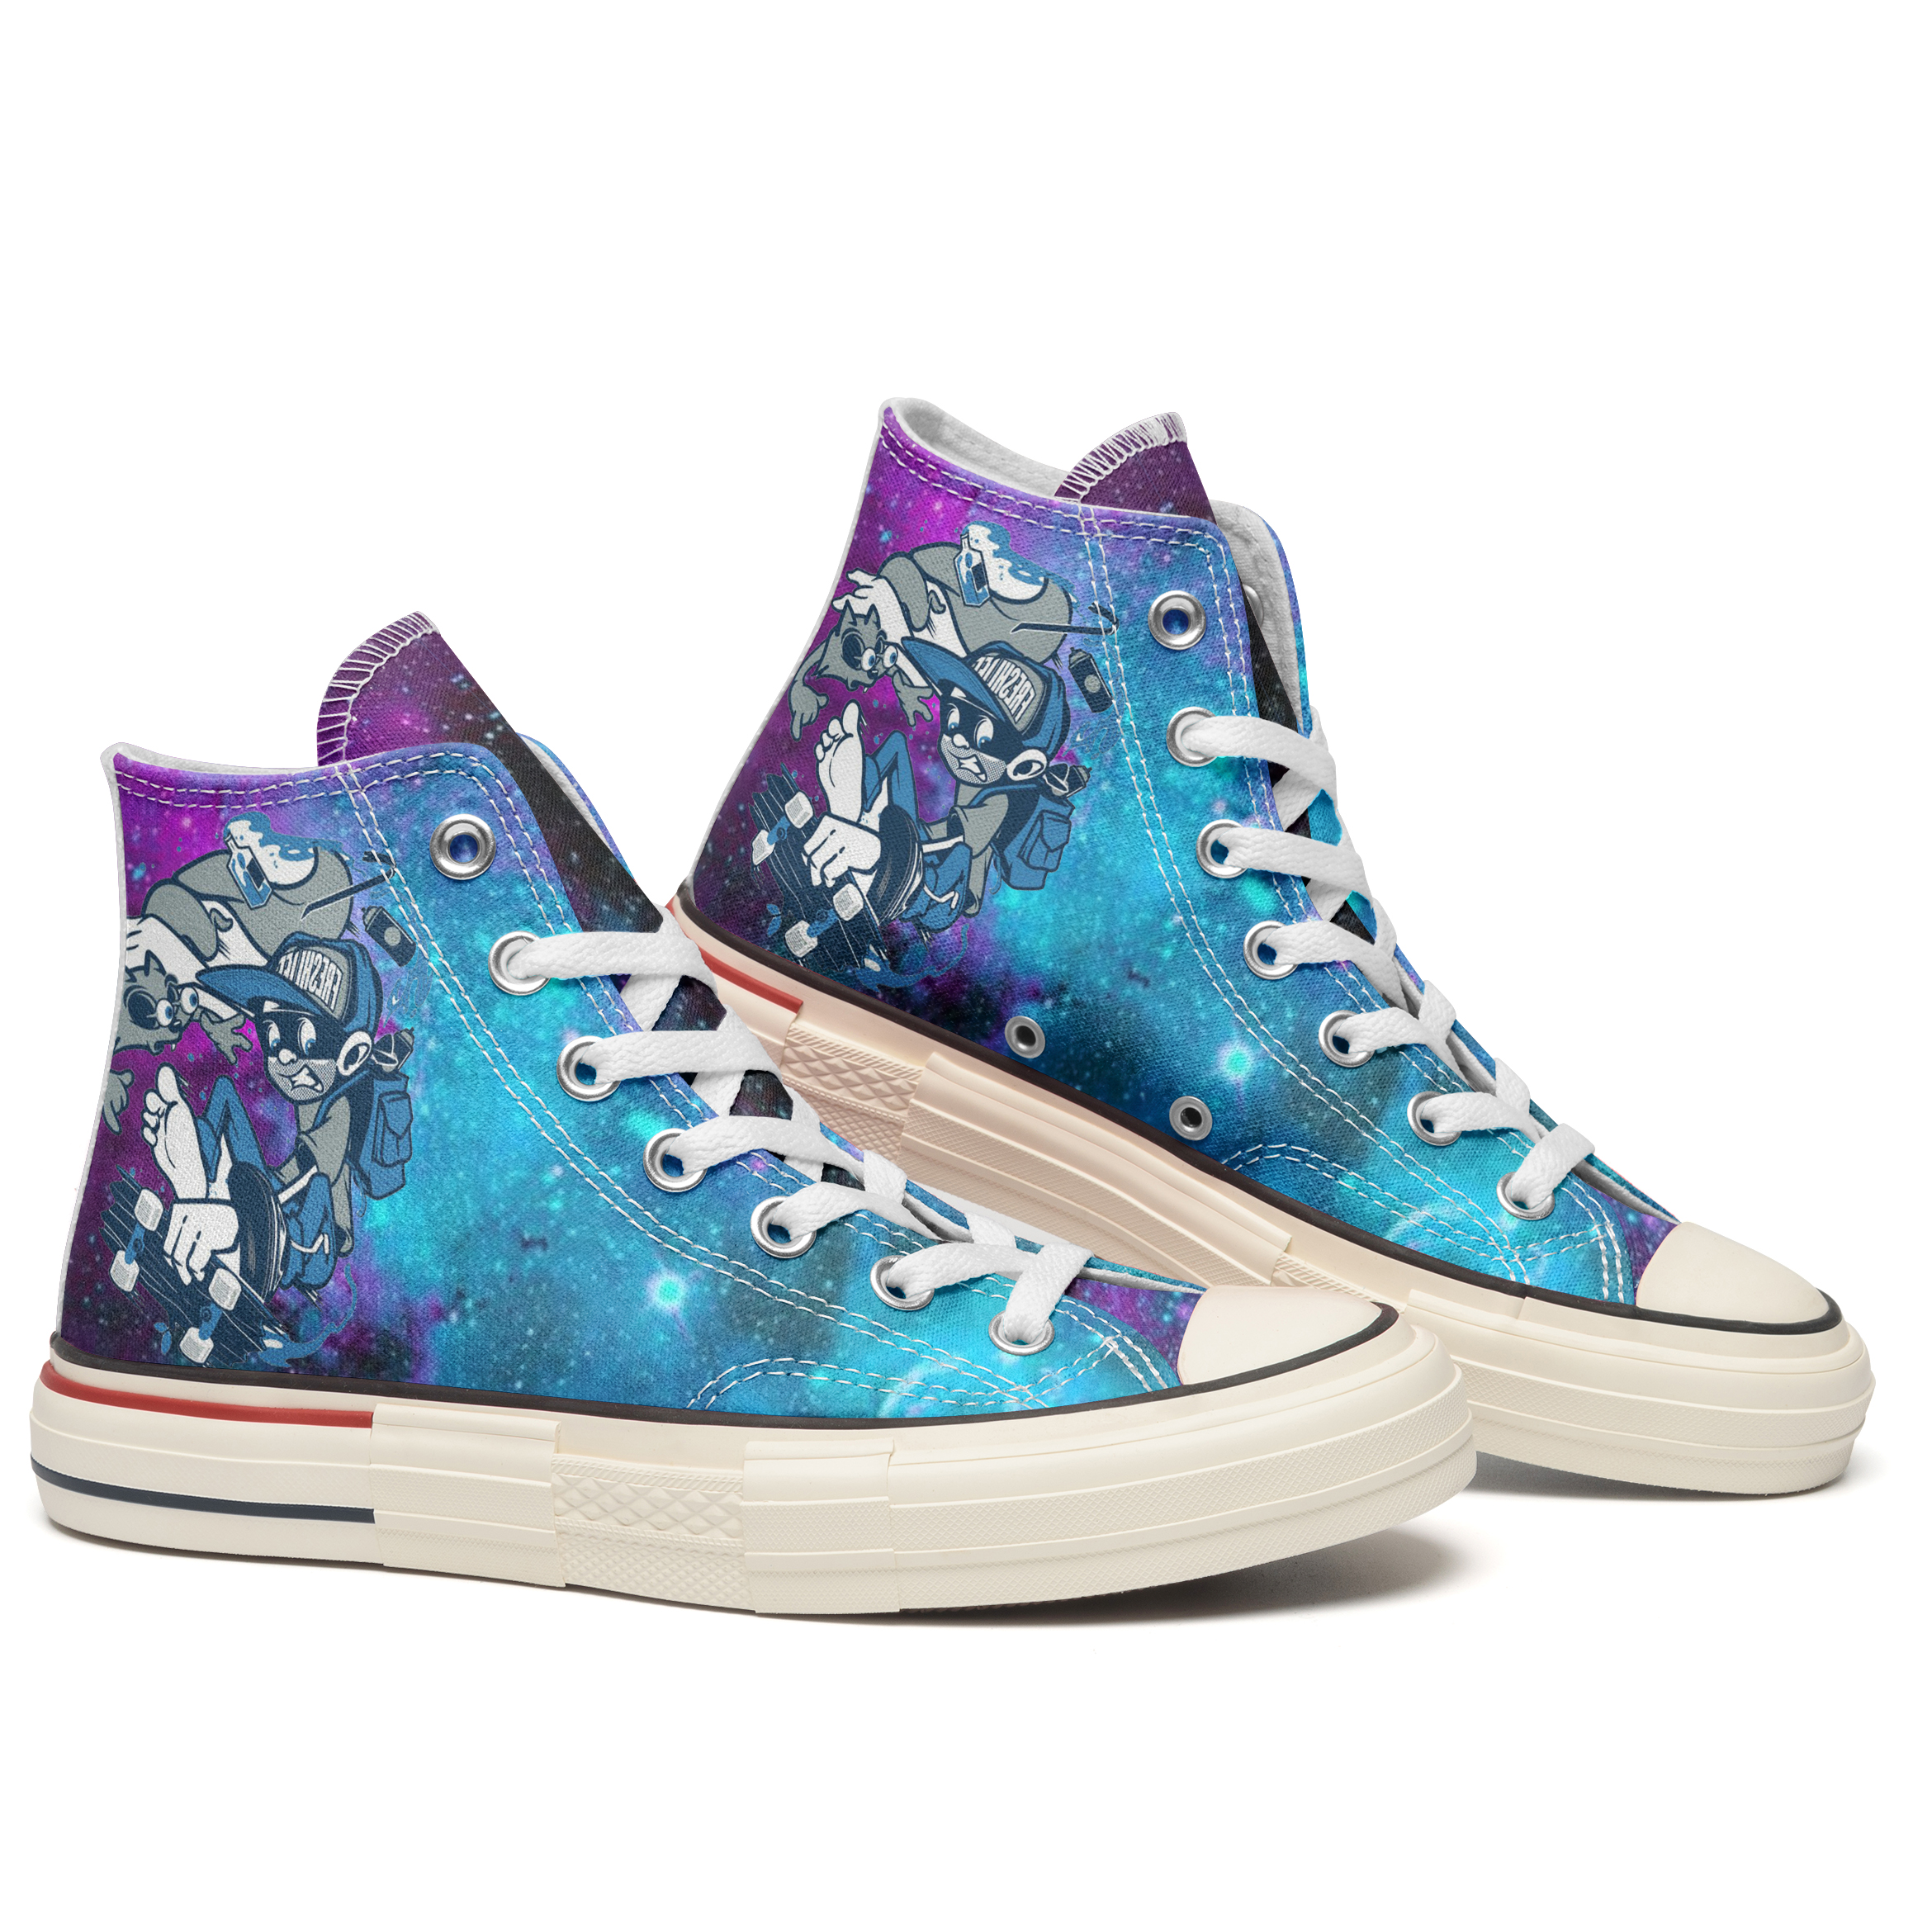 Monster Catch You High Top Canvas Shoes Special Edition